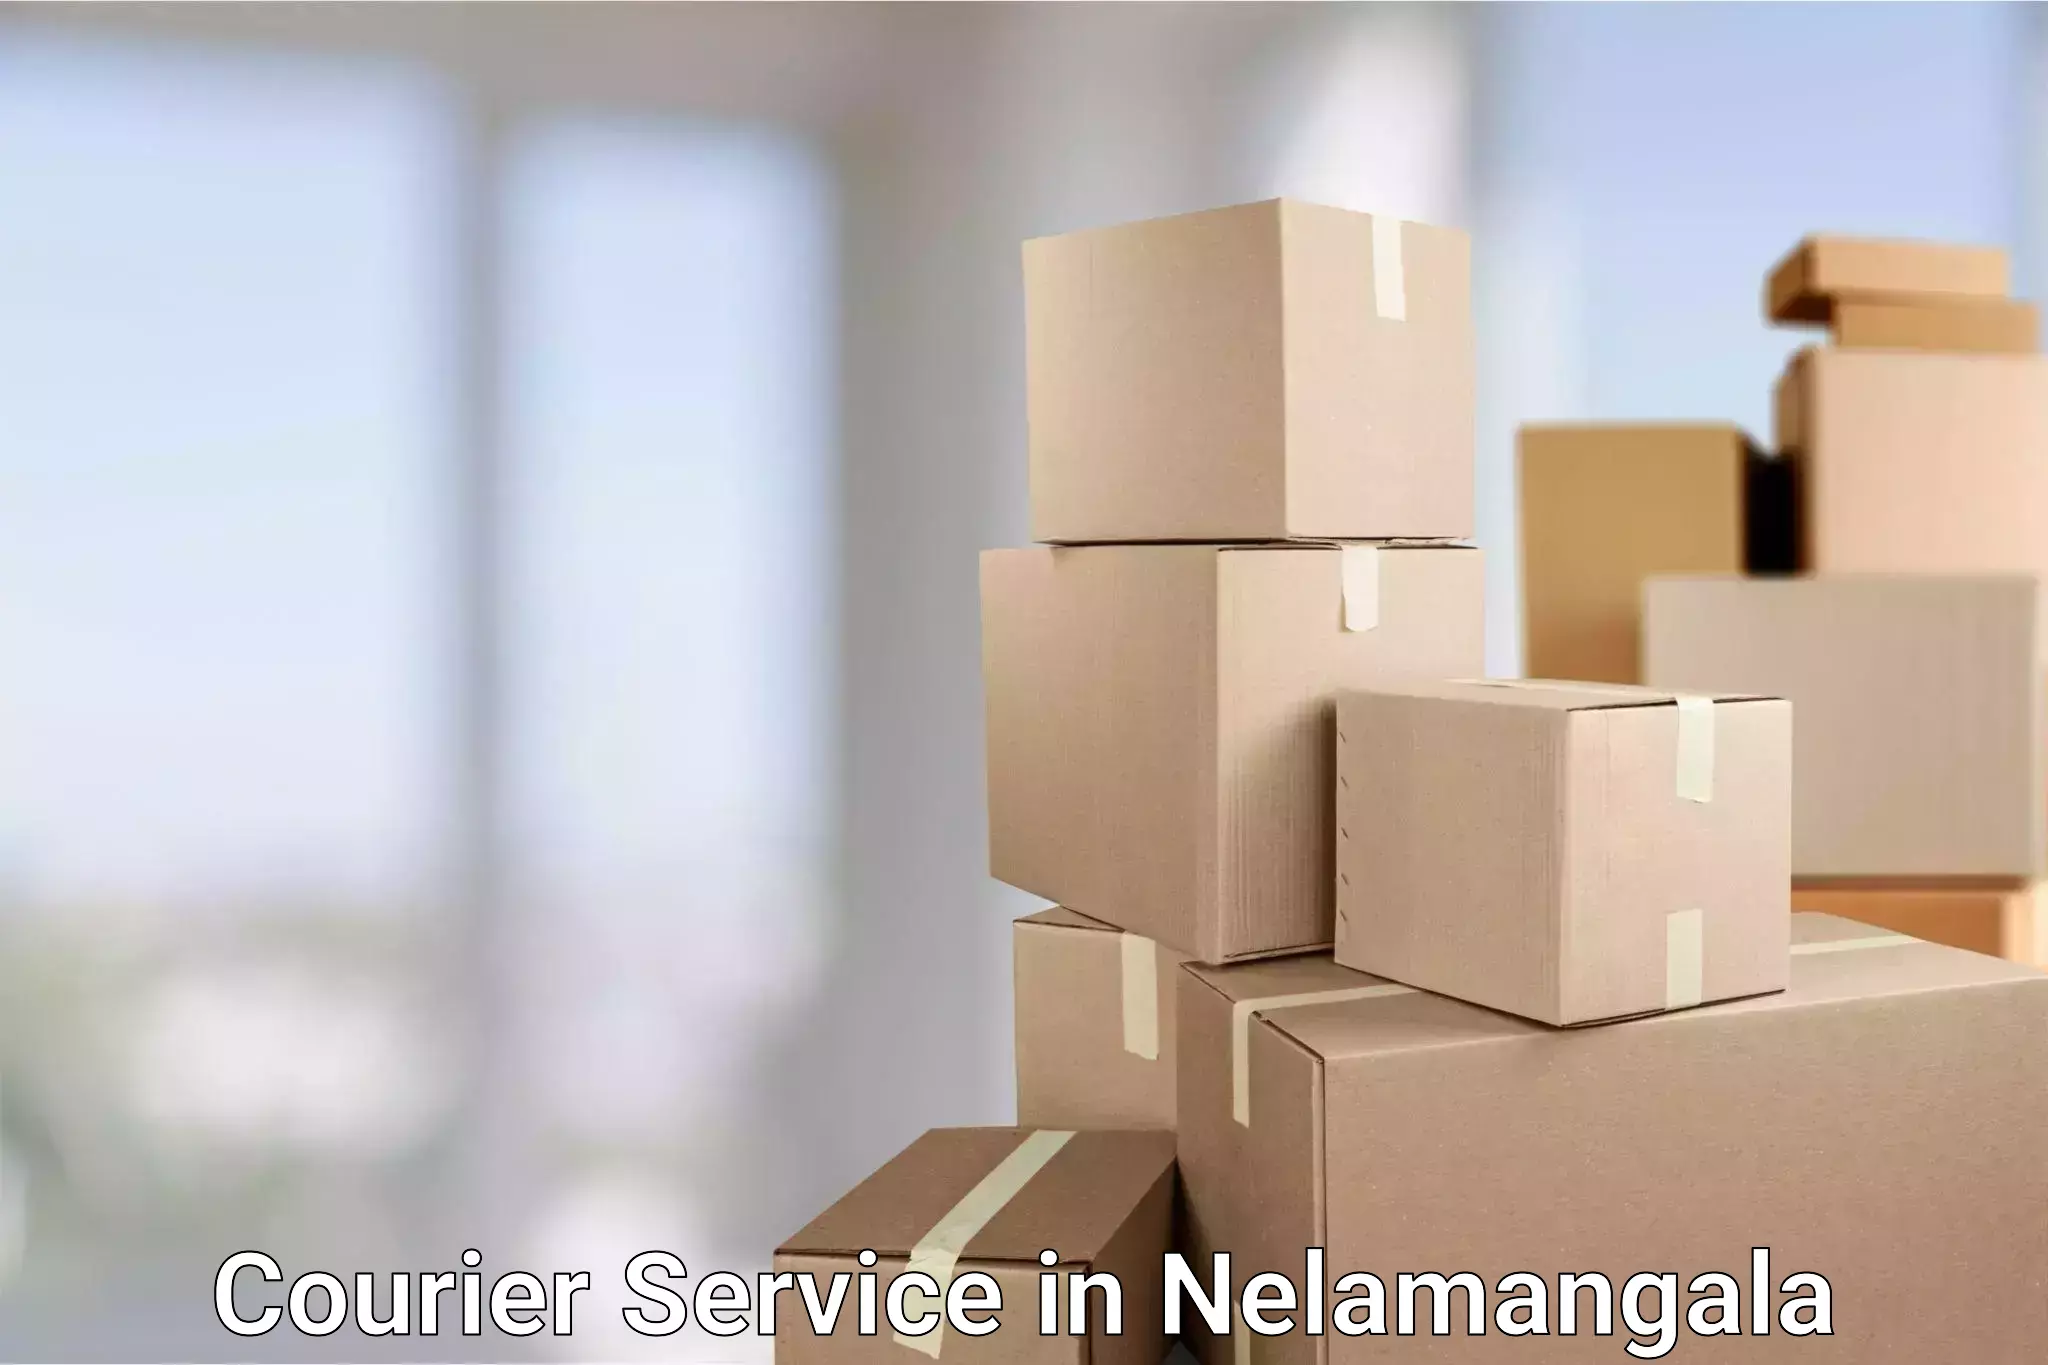 Streamlined delivery processes in Nelamangala